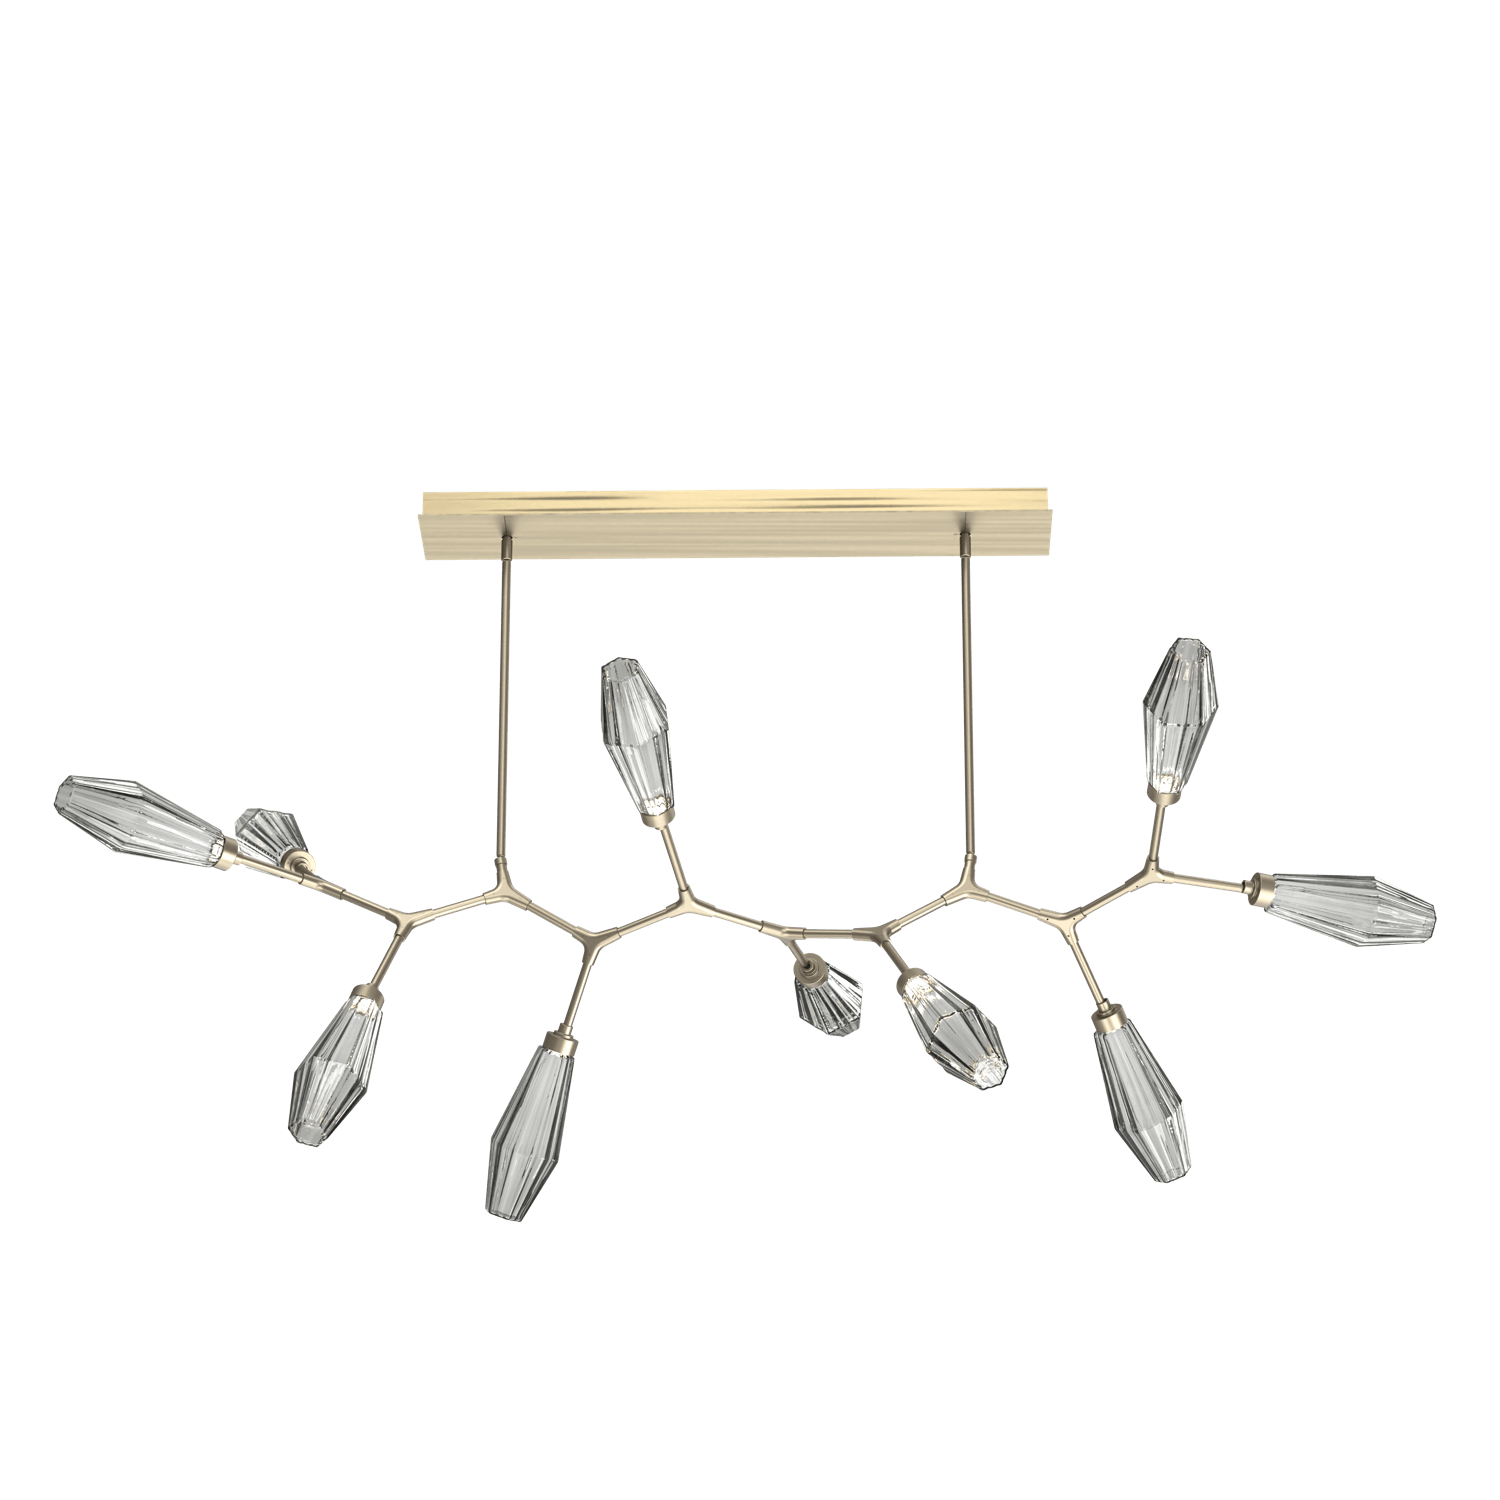 PLB0049-BC-HB-RS-Hammerton-Studio-Aalto-10-light-modern-branch-chandelier-with-heritage-brass-finish-and-optic-ribbed-smoke-glass-shades-and-LED-lamping